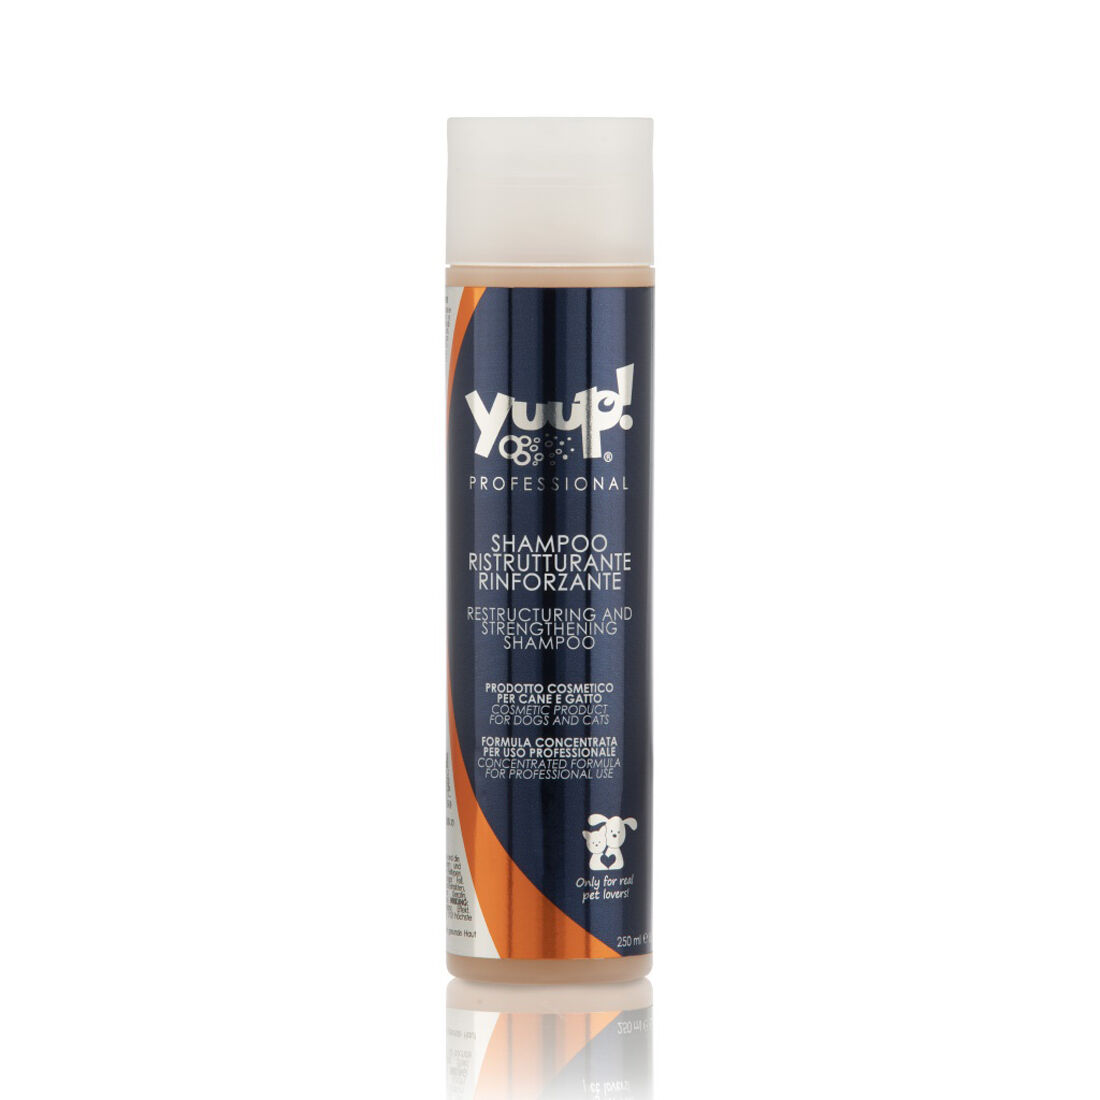 Yuup! Professional Shampoo Build and Strengthen